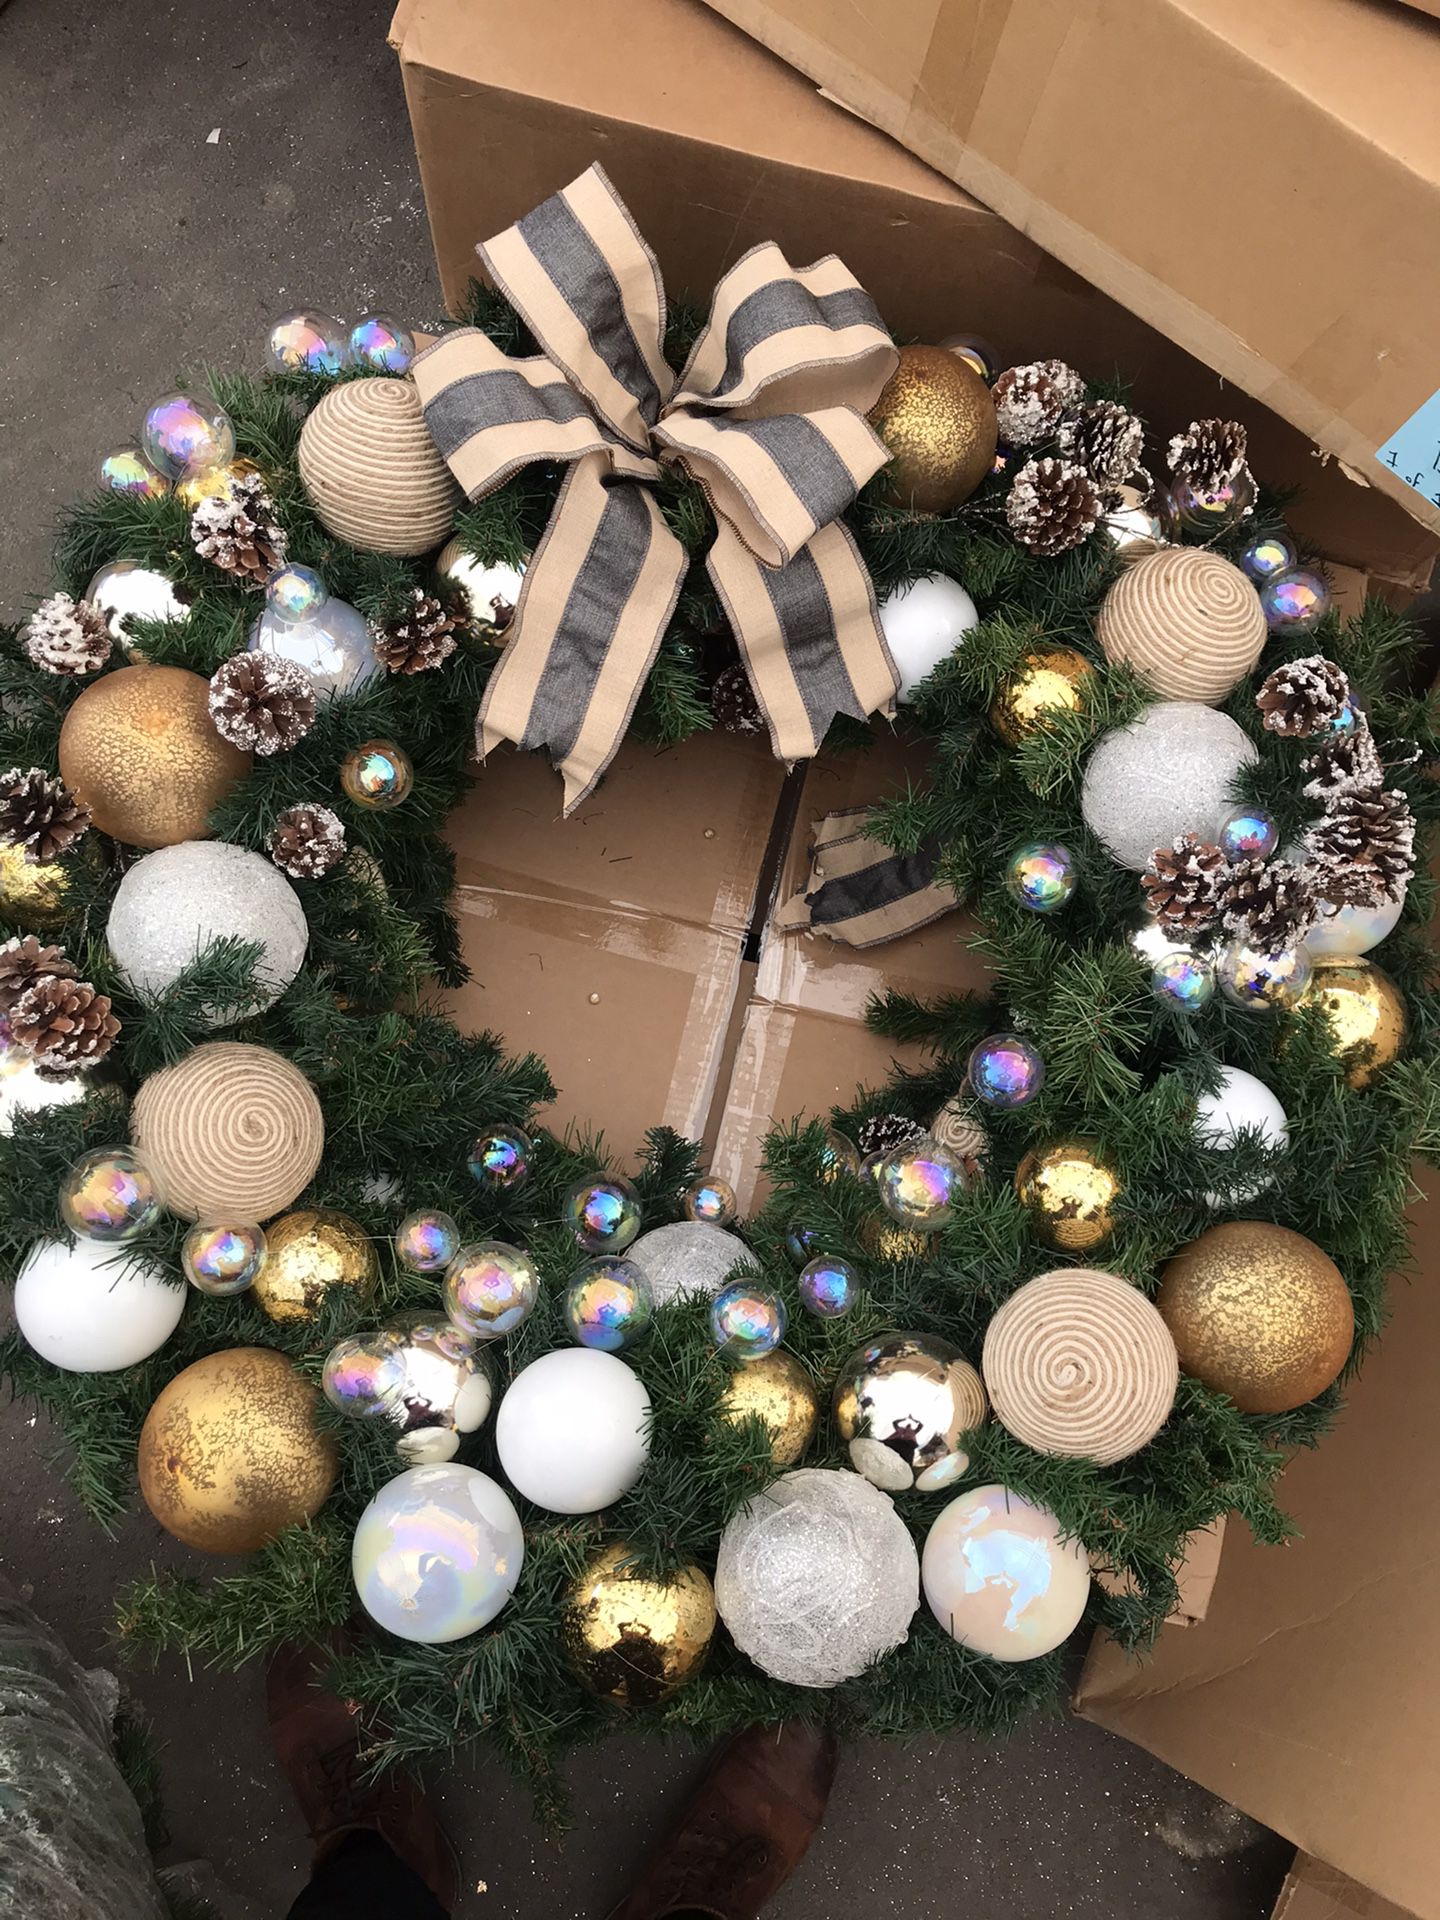 Hand crafted 48 inch Christmas wreath with ornaments